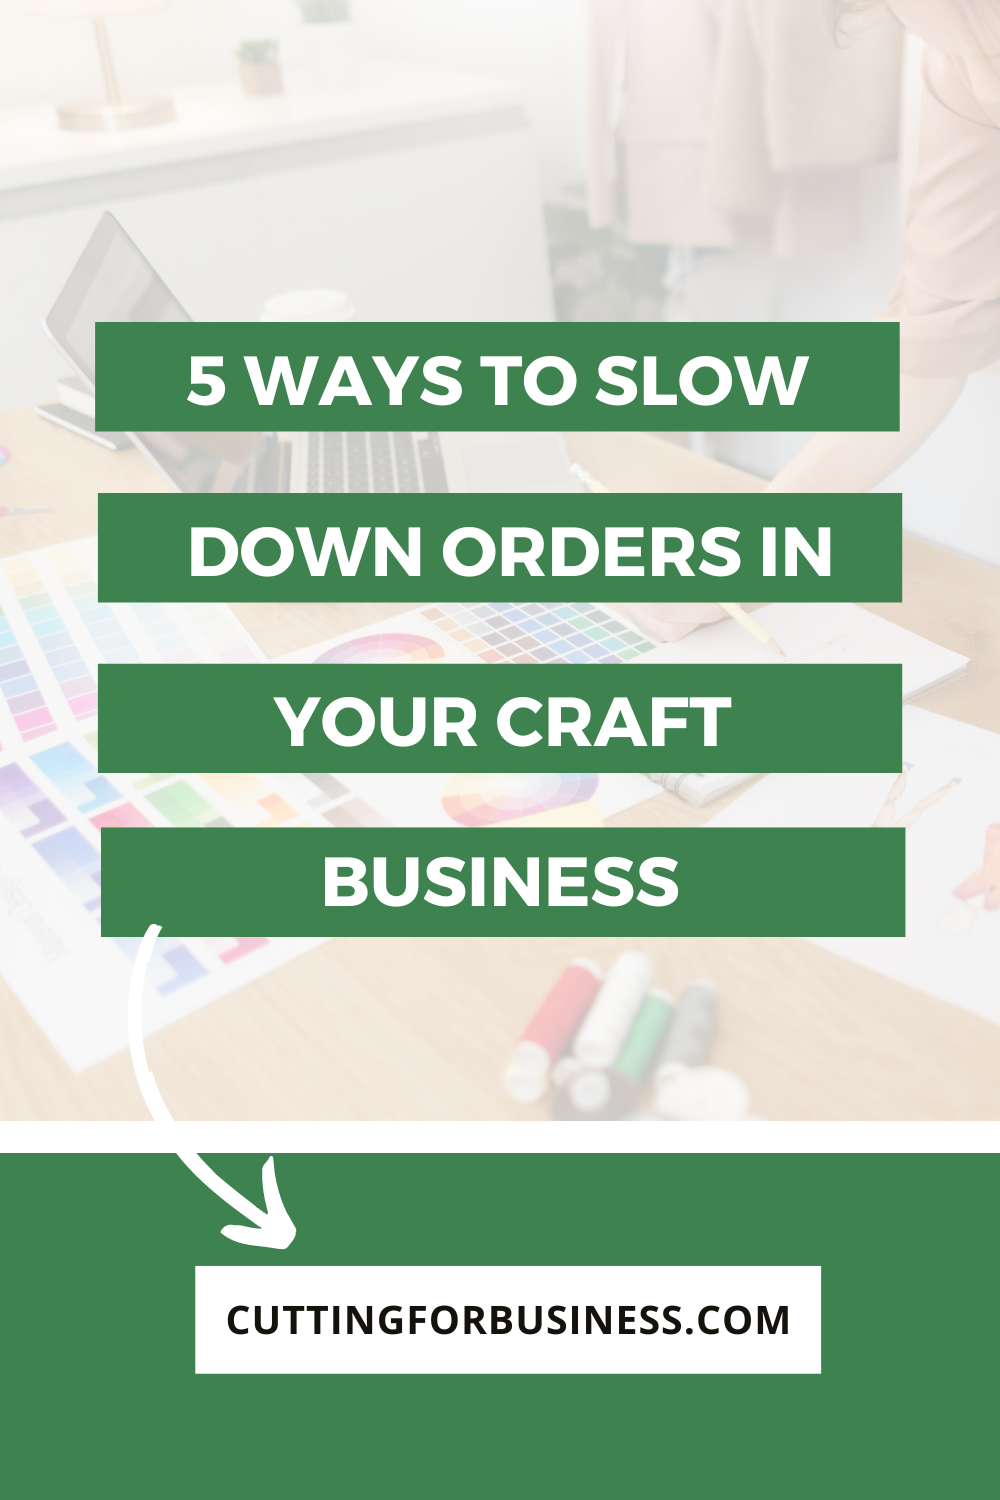 5 Ways to Slow Down Orders in Your Craft Business - cuttingforbusiness.com.